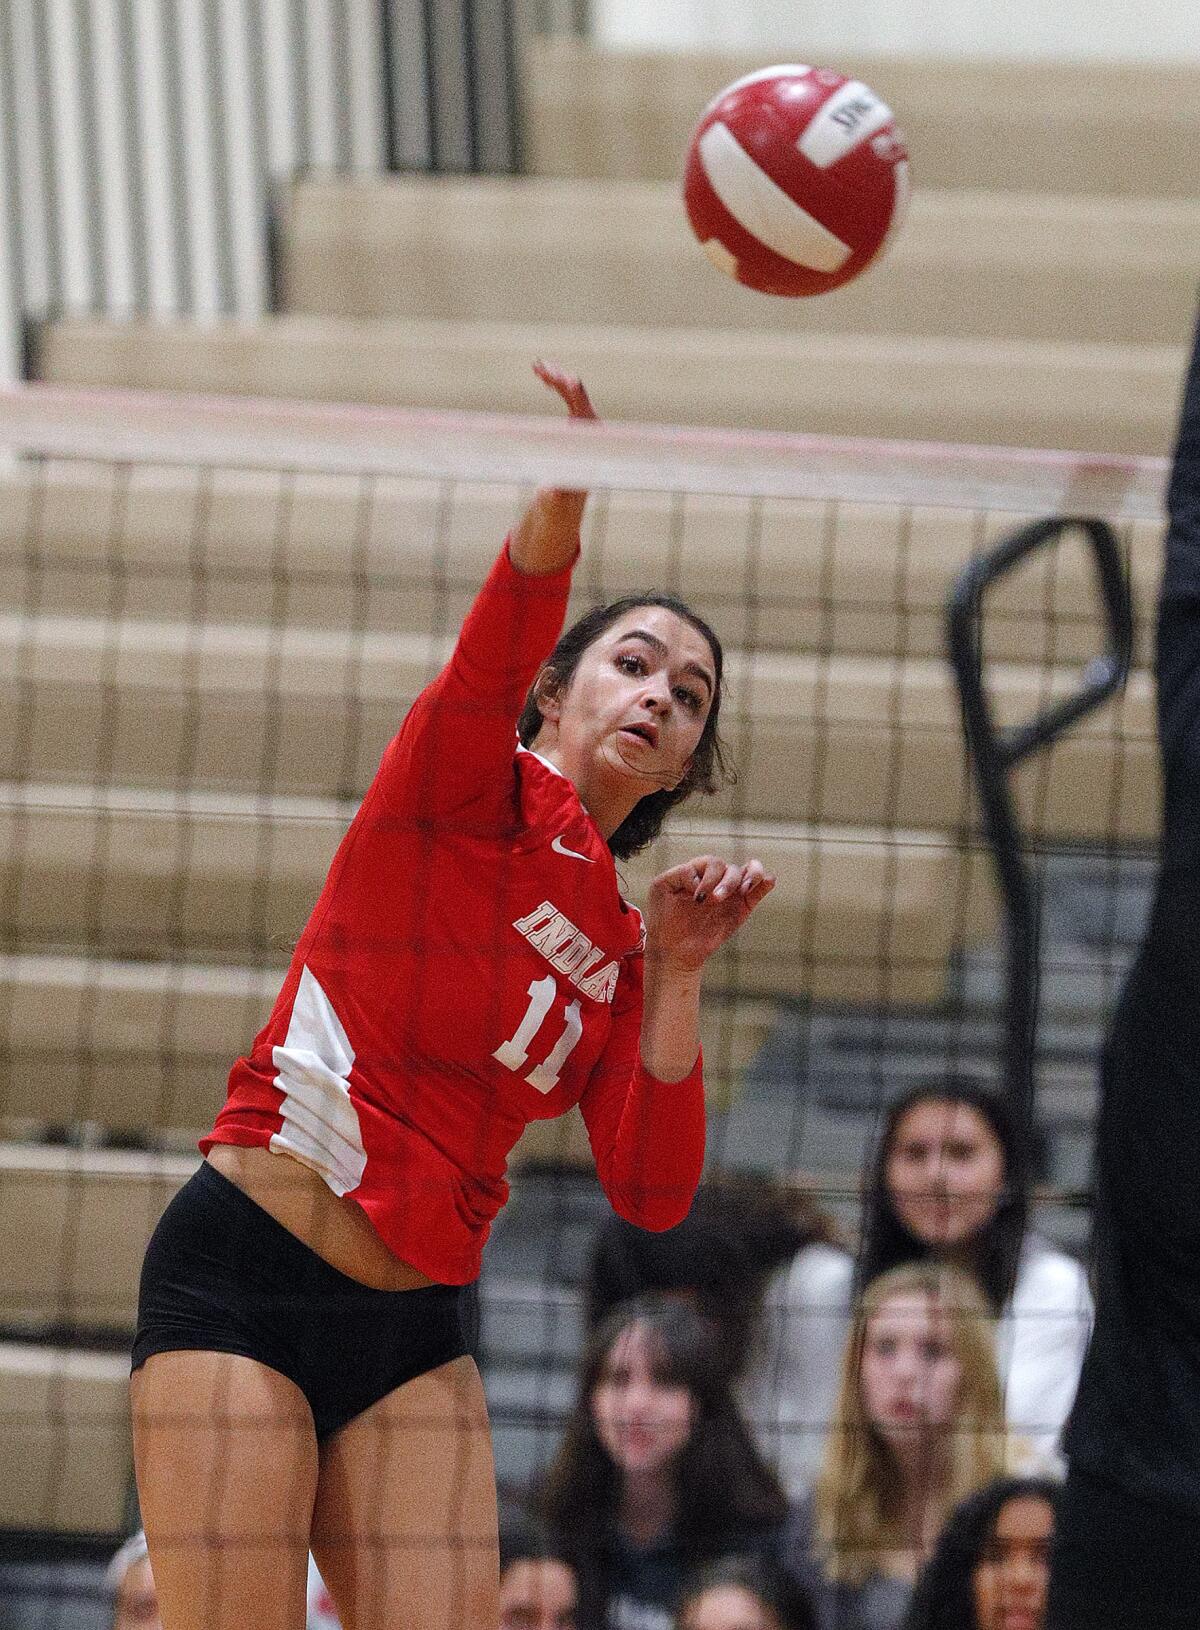 Burroughs' Catie Virtue hits a kill attempt against Murrieta Valley in a CIF Division II playoff girls' volleyball match at Burroughs High School on Thursday, October 24, 2019. Murrieta Valley won the match 3-0.